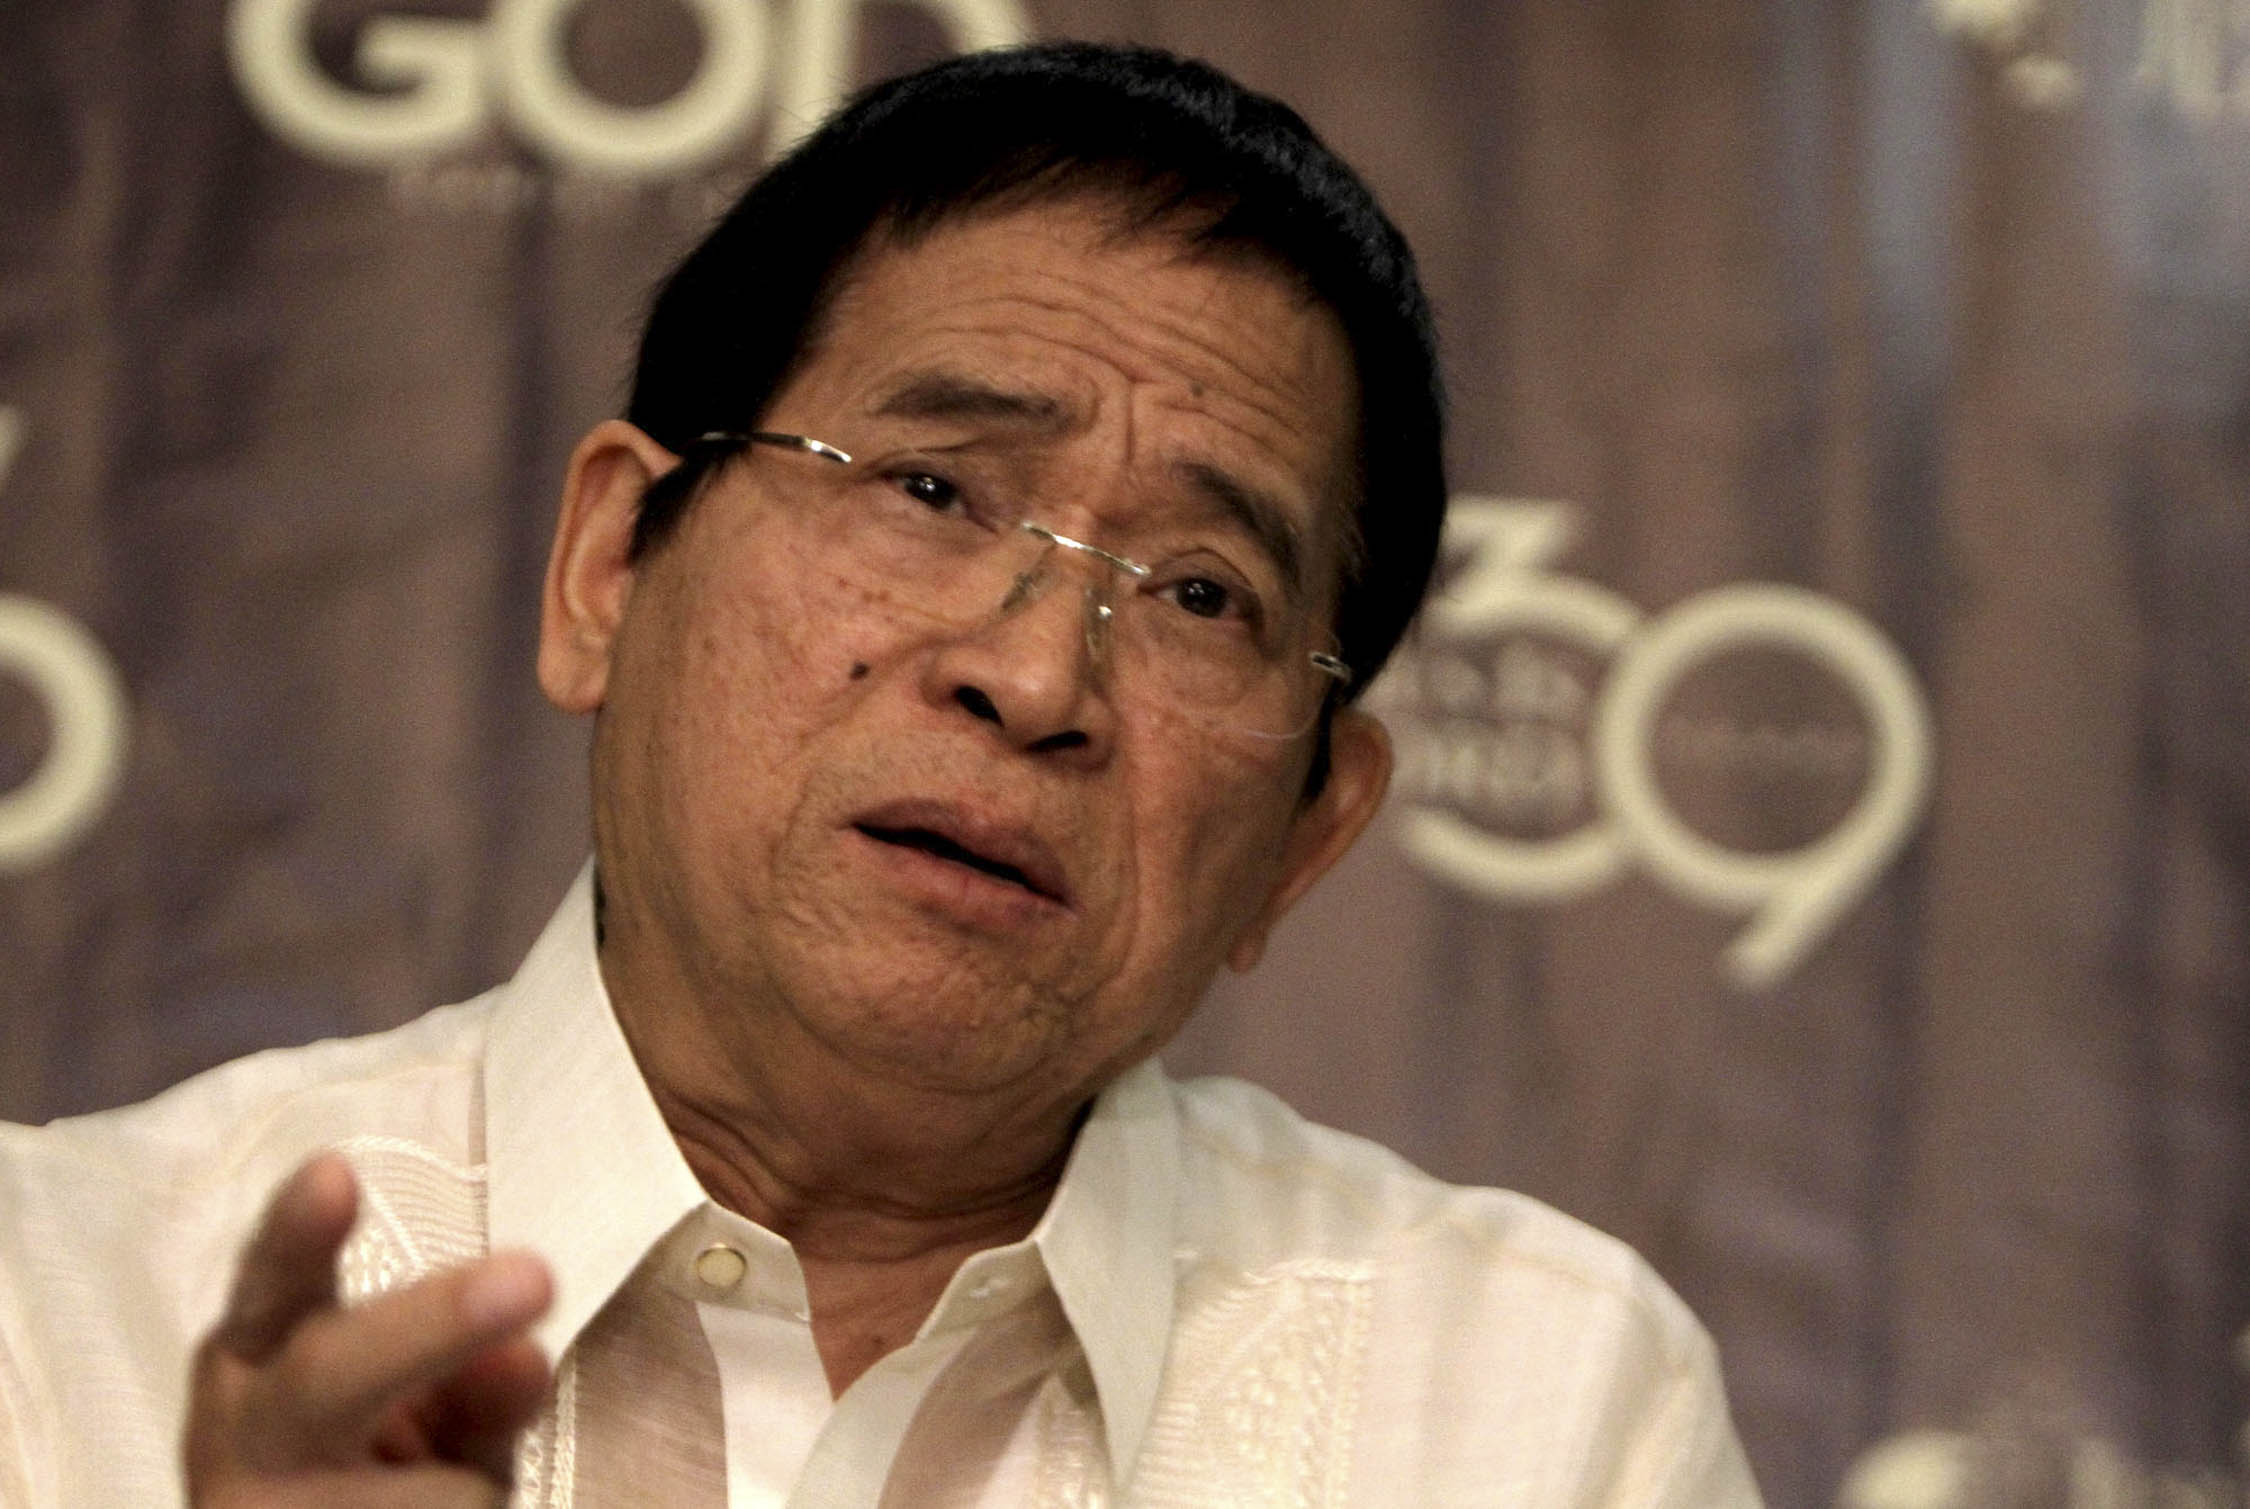 Pacquiao to appoint Bro. Eddie as corruption czar if he becomes president